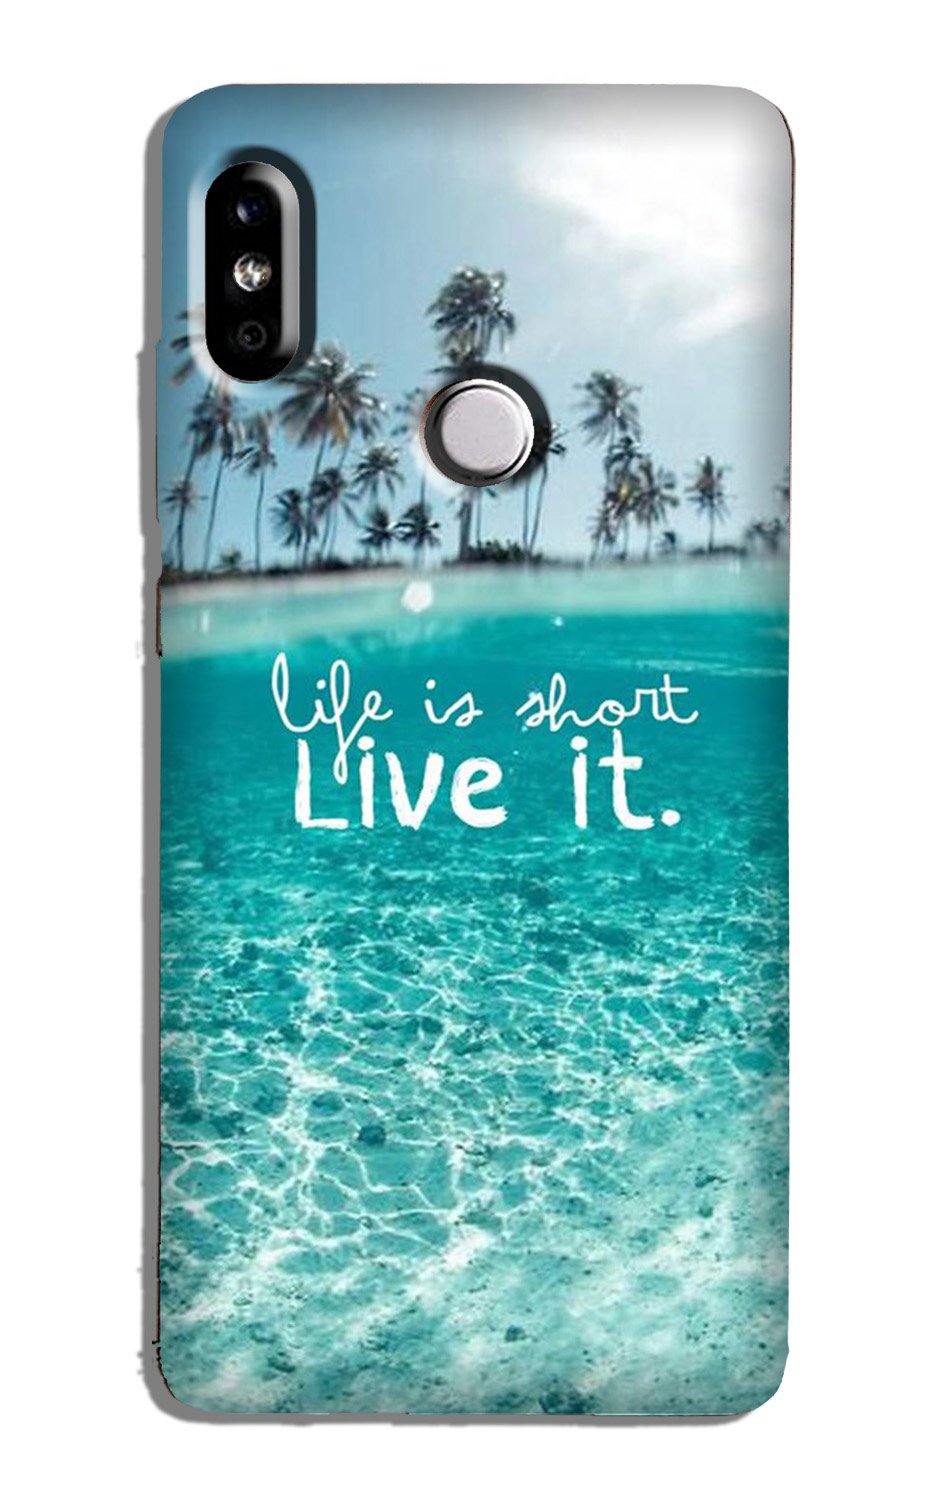 Life is short live it Case for Redmi Note 5 Pro